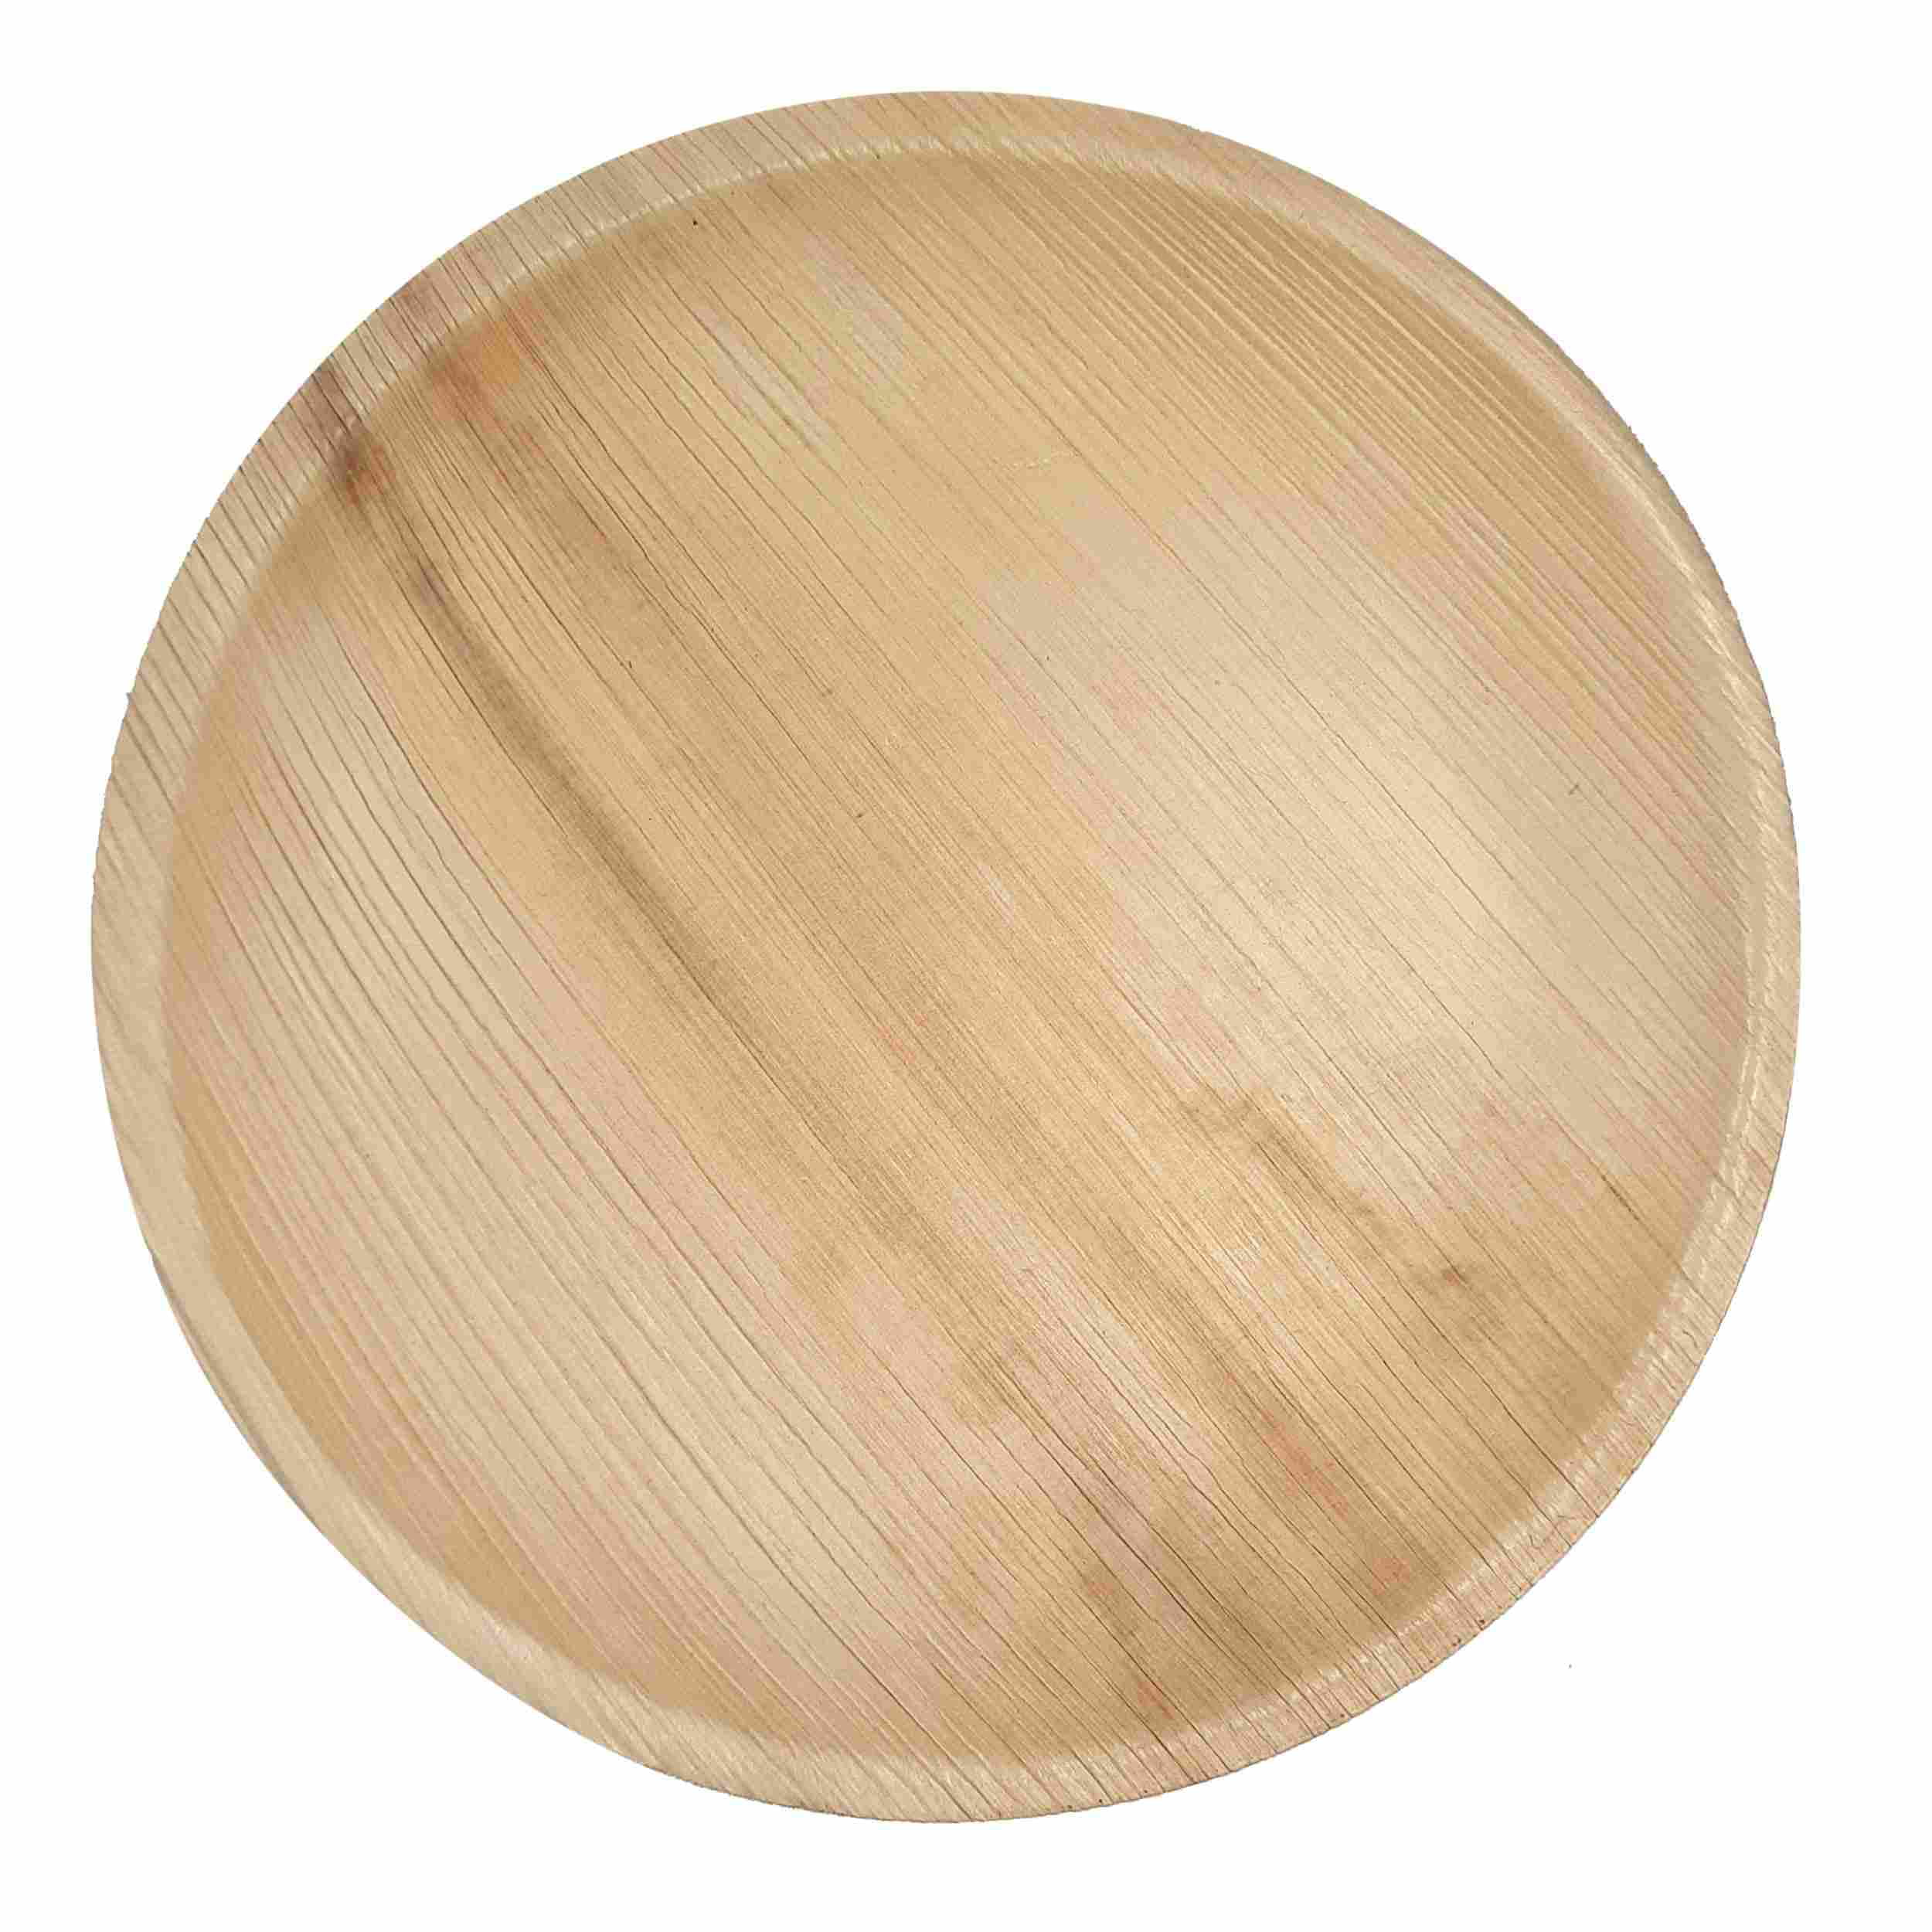 Compostable Disposable Plate Pack For Camping Eco-friendly Natural 6 Shallow Palm Leaf Plates 50 Pcs Wedding Parties.